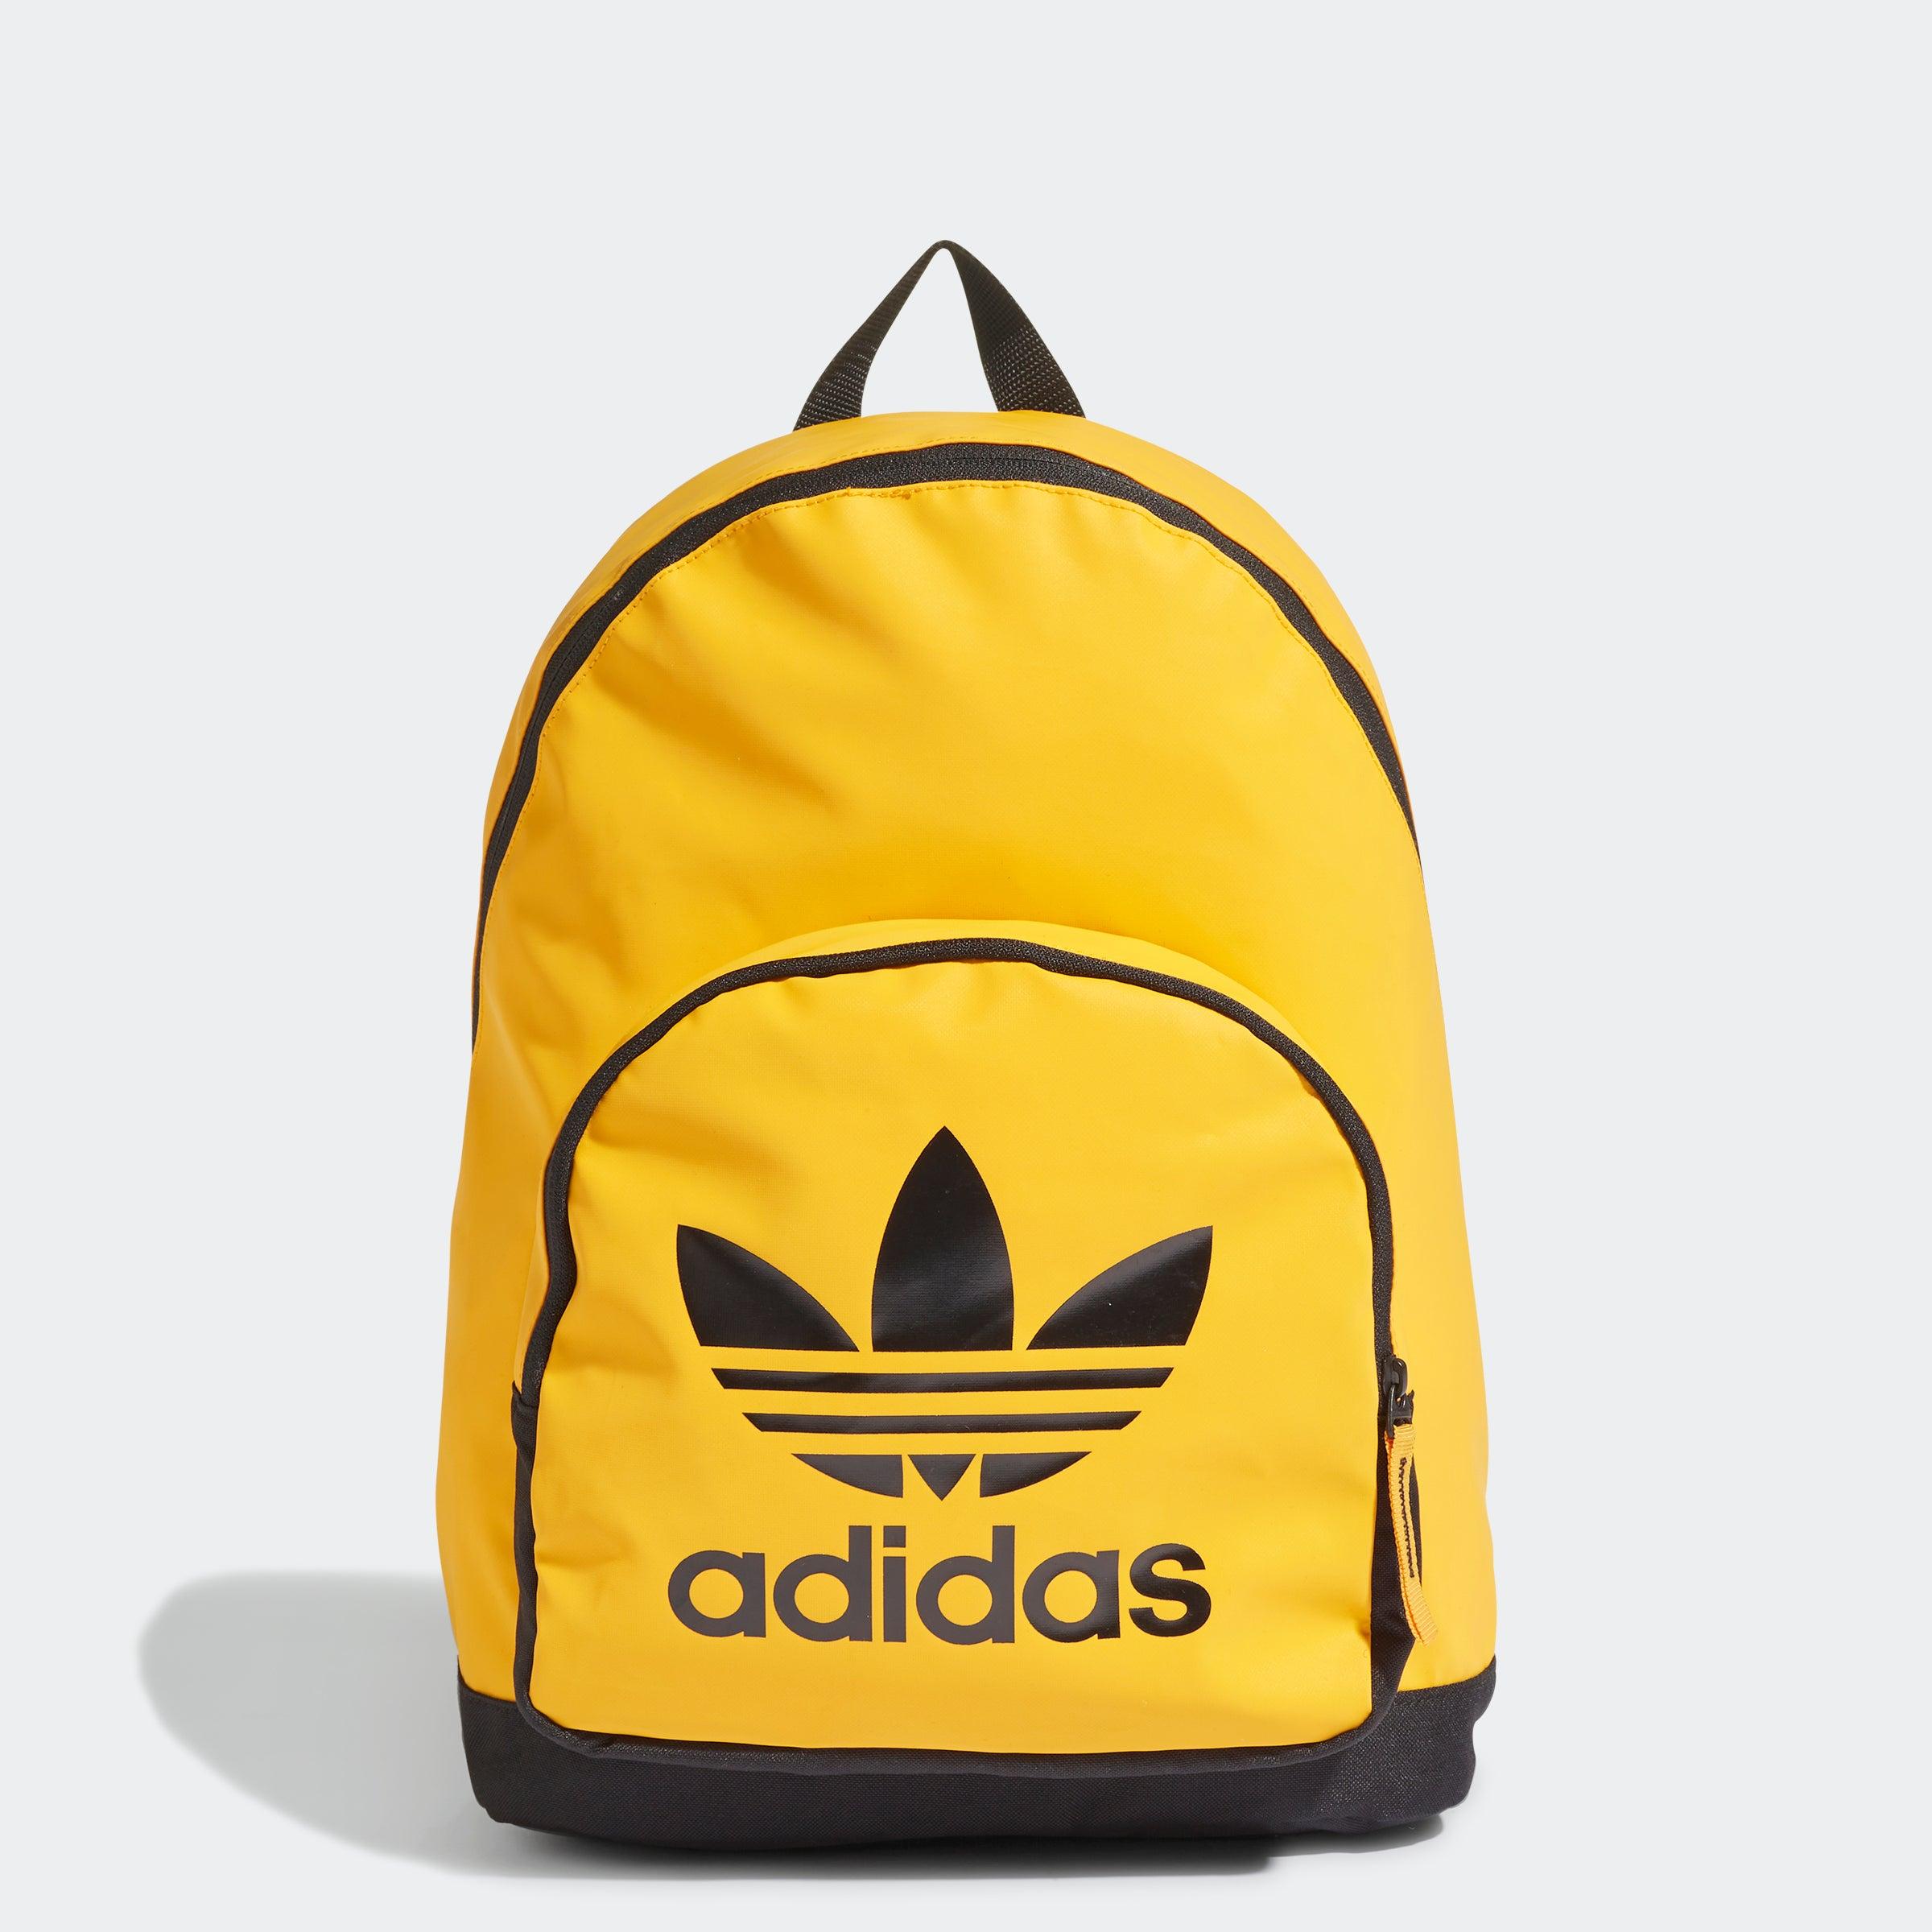 Originals | Backpack Yellow Lyst Adicolor Archive in for adidas Men